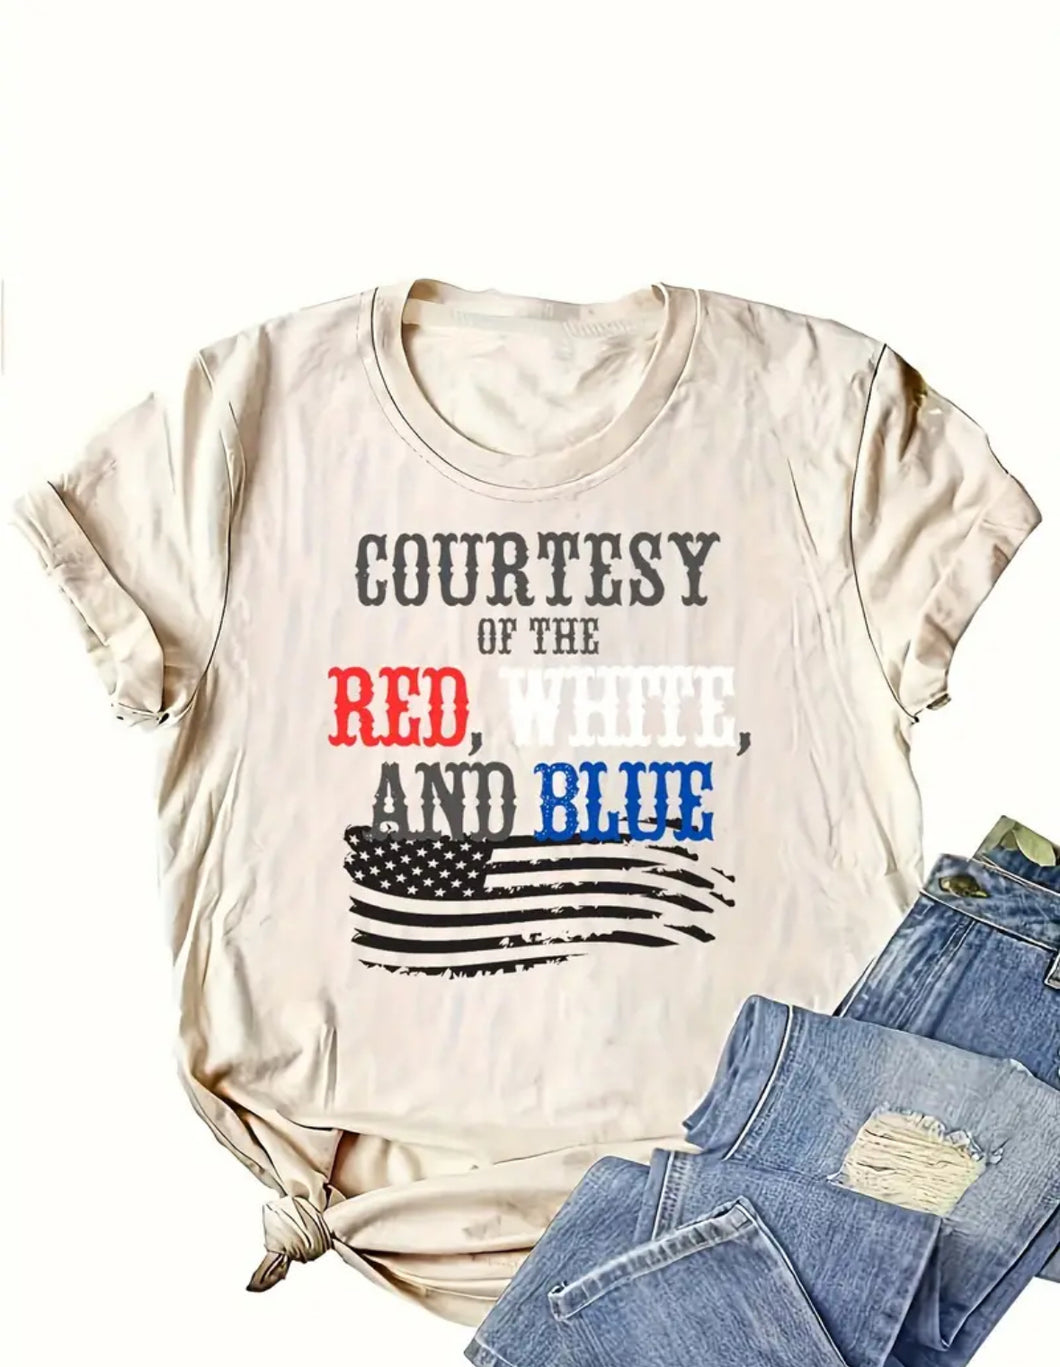 Courtesy of the Red, White & Blue Tee